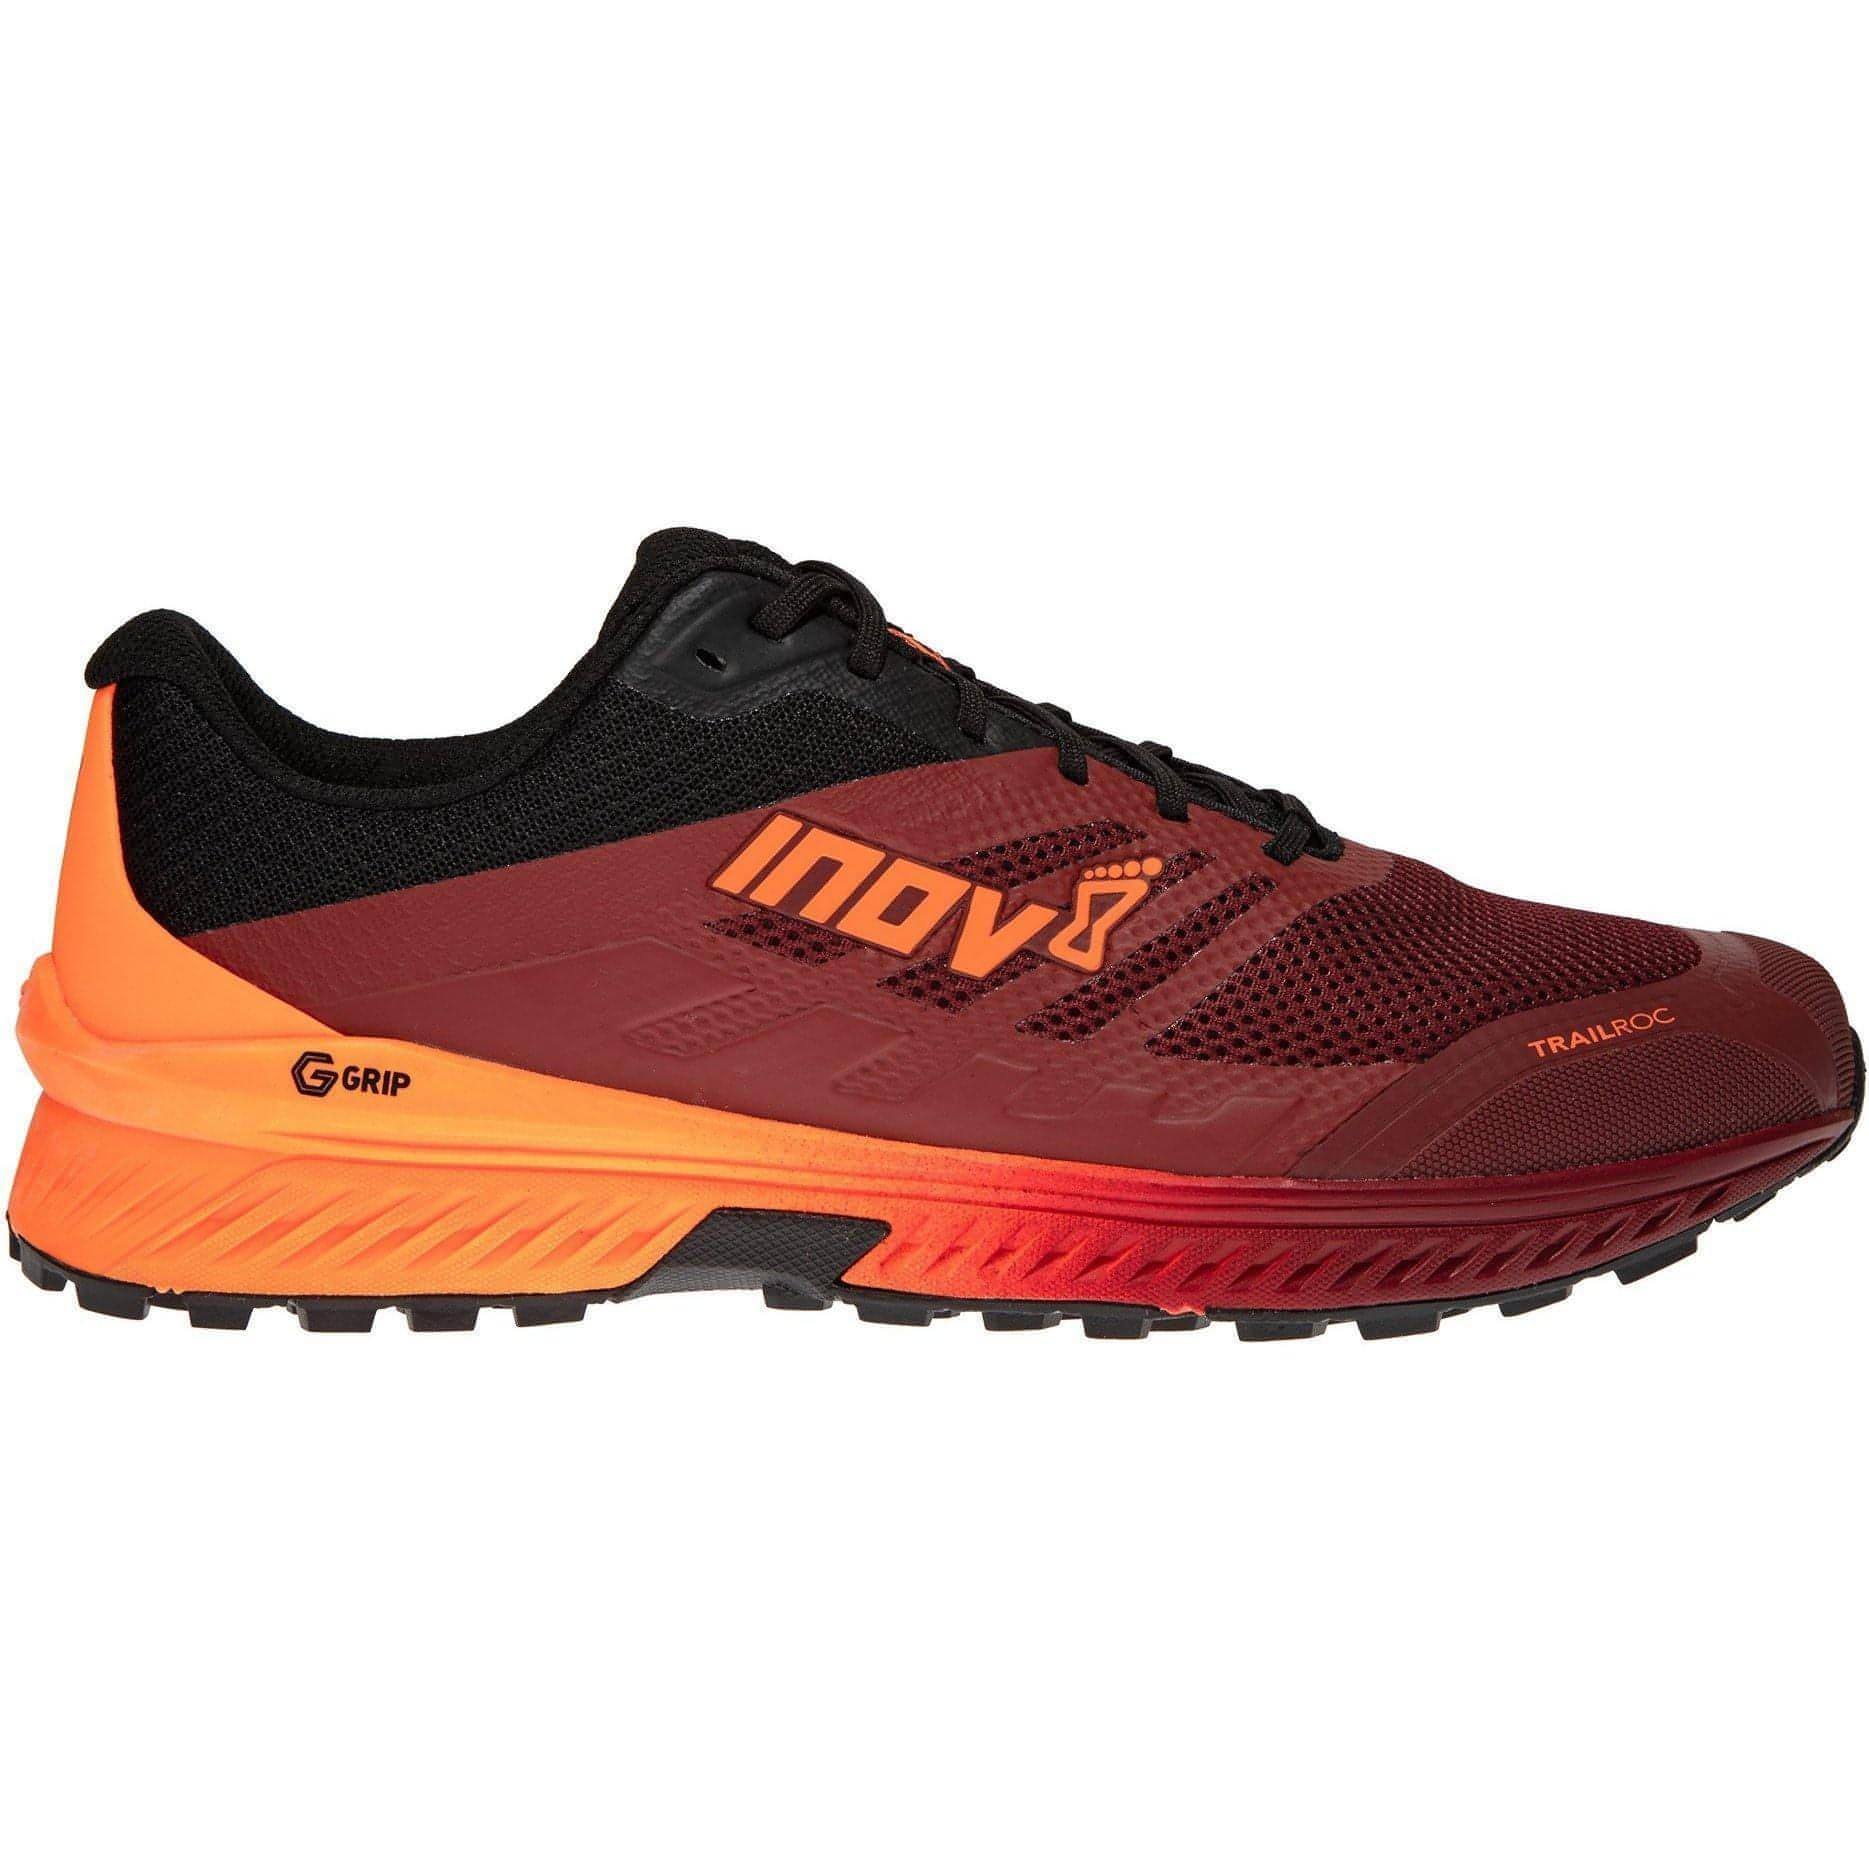 Inov8 Trailroc G 280 Mens Trail Running Shoes - Red - Start Fitness